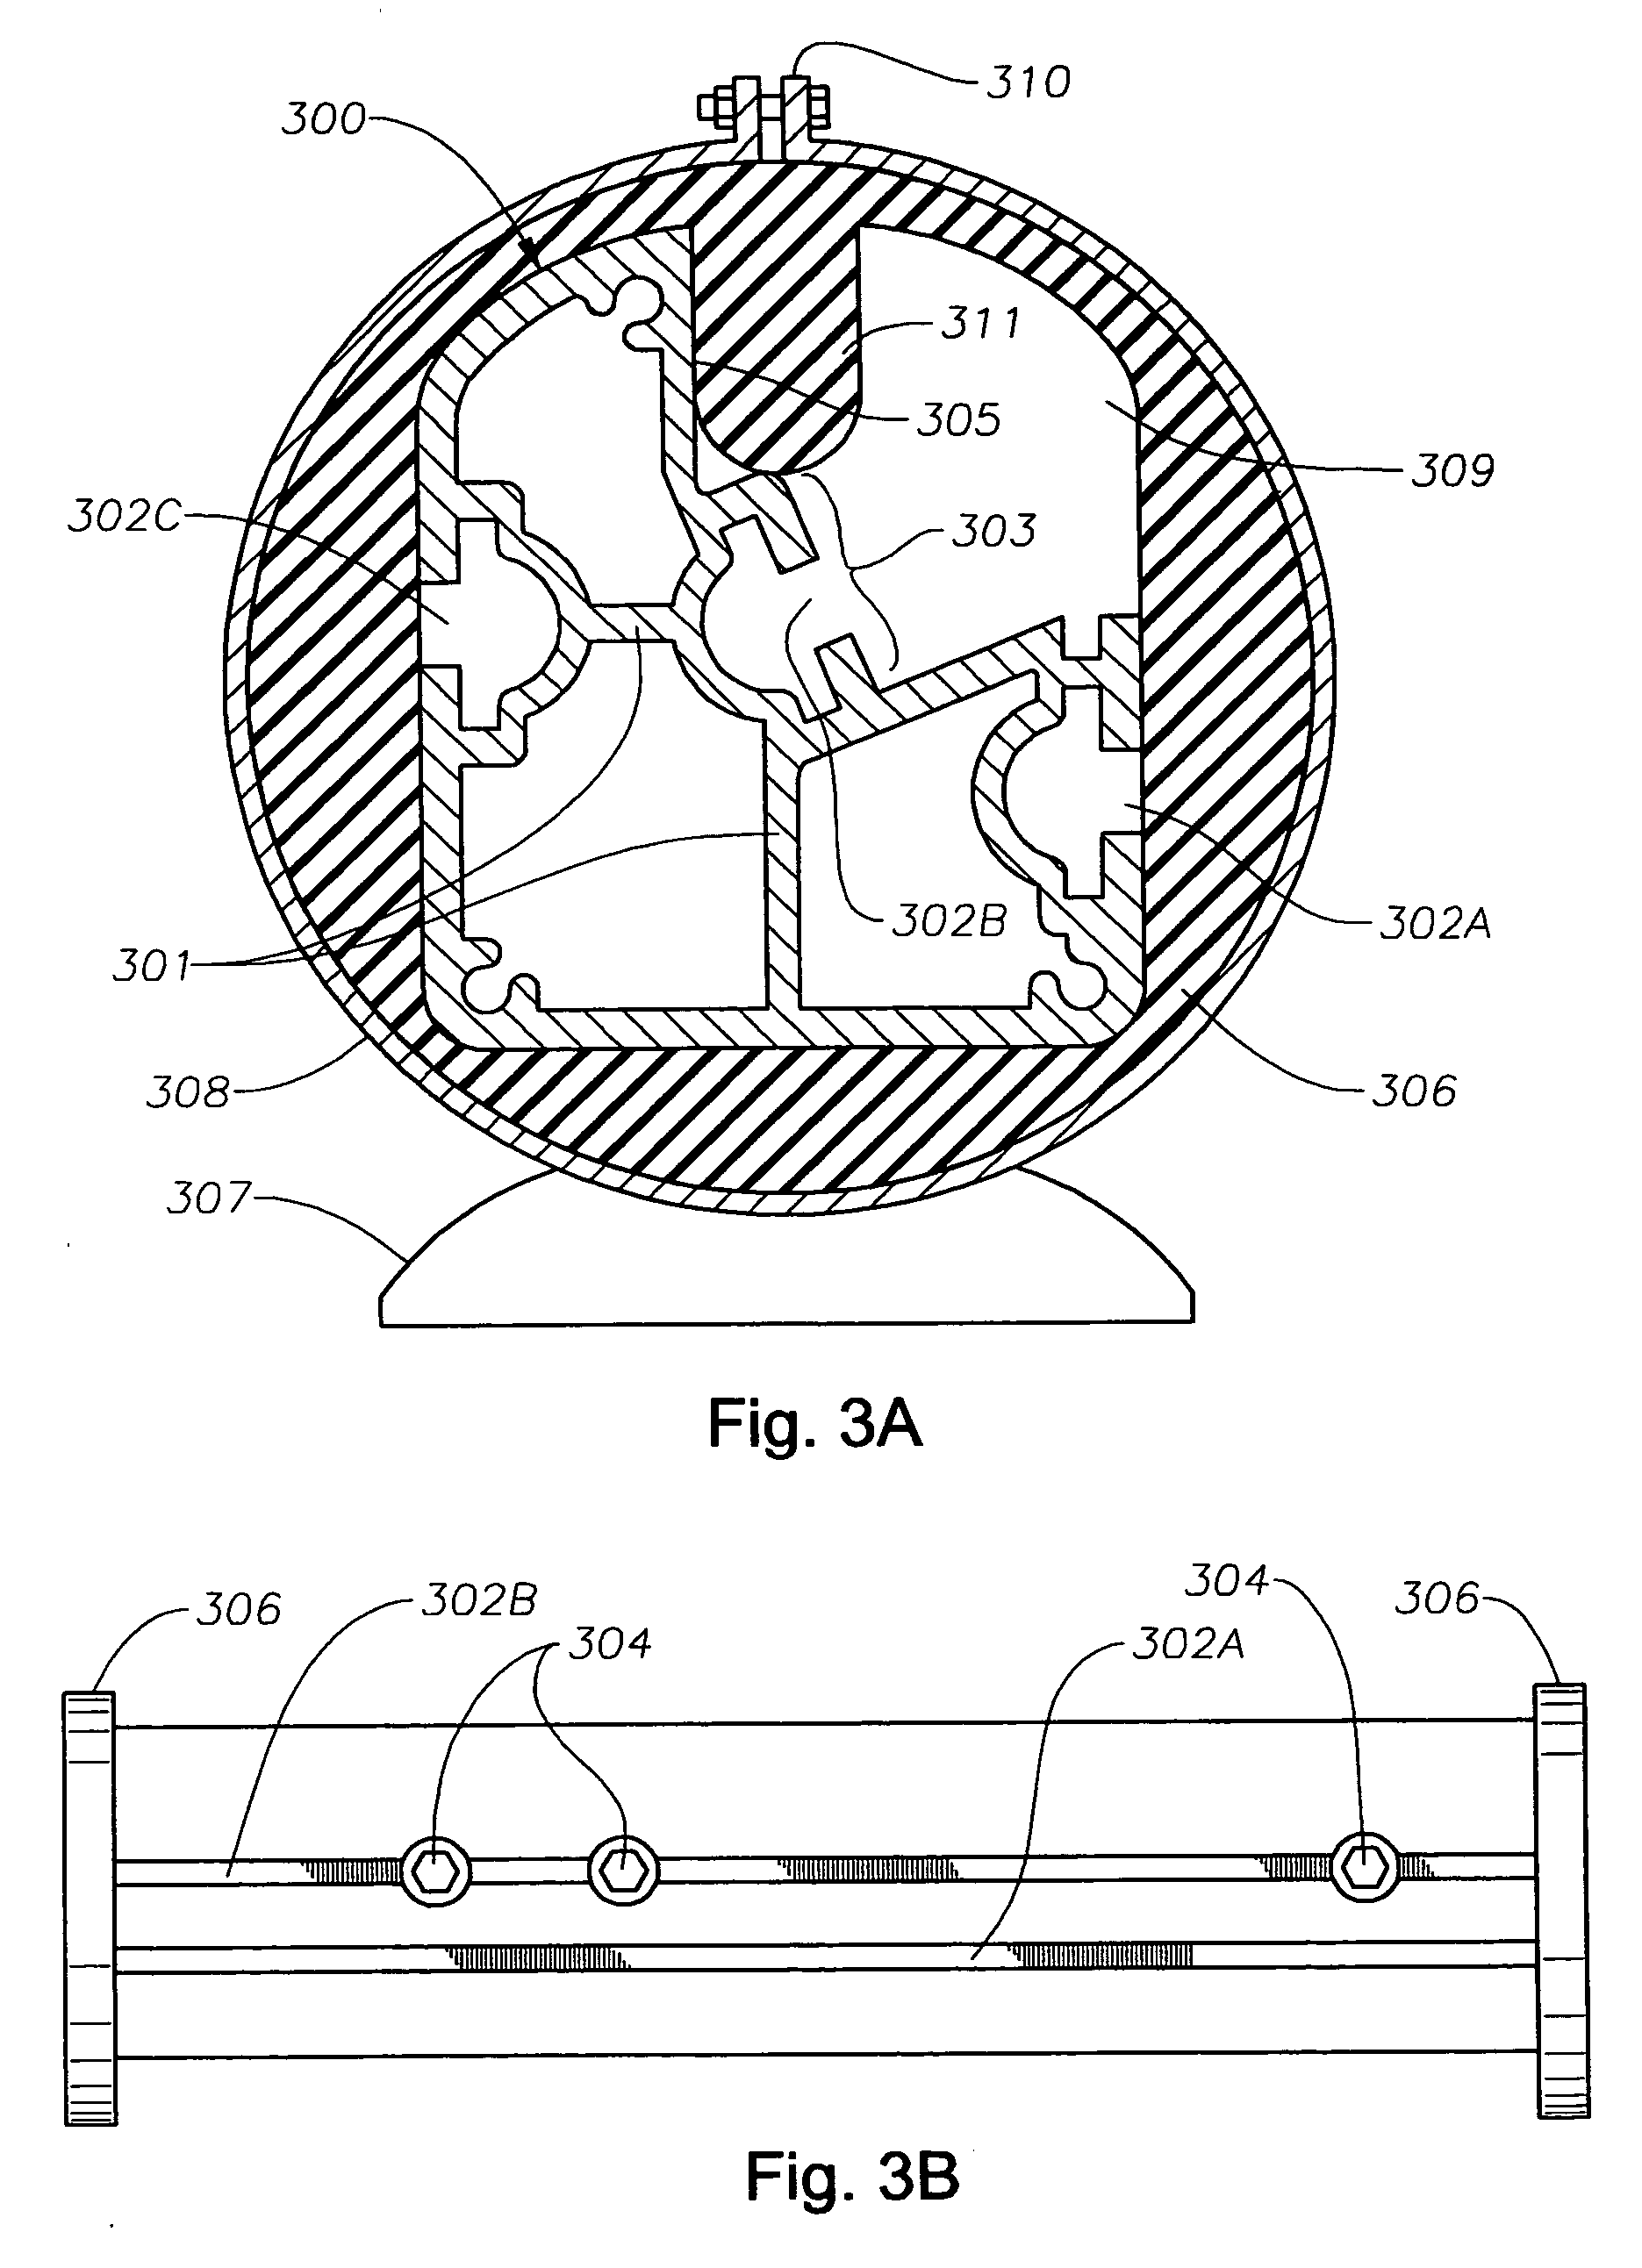 Display device with rail support